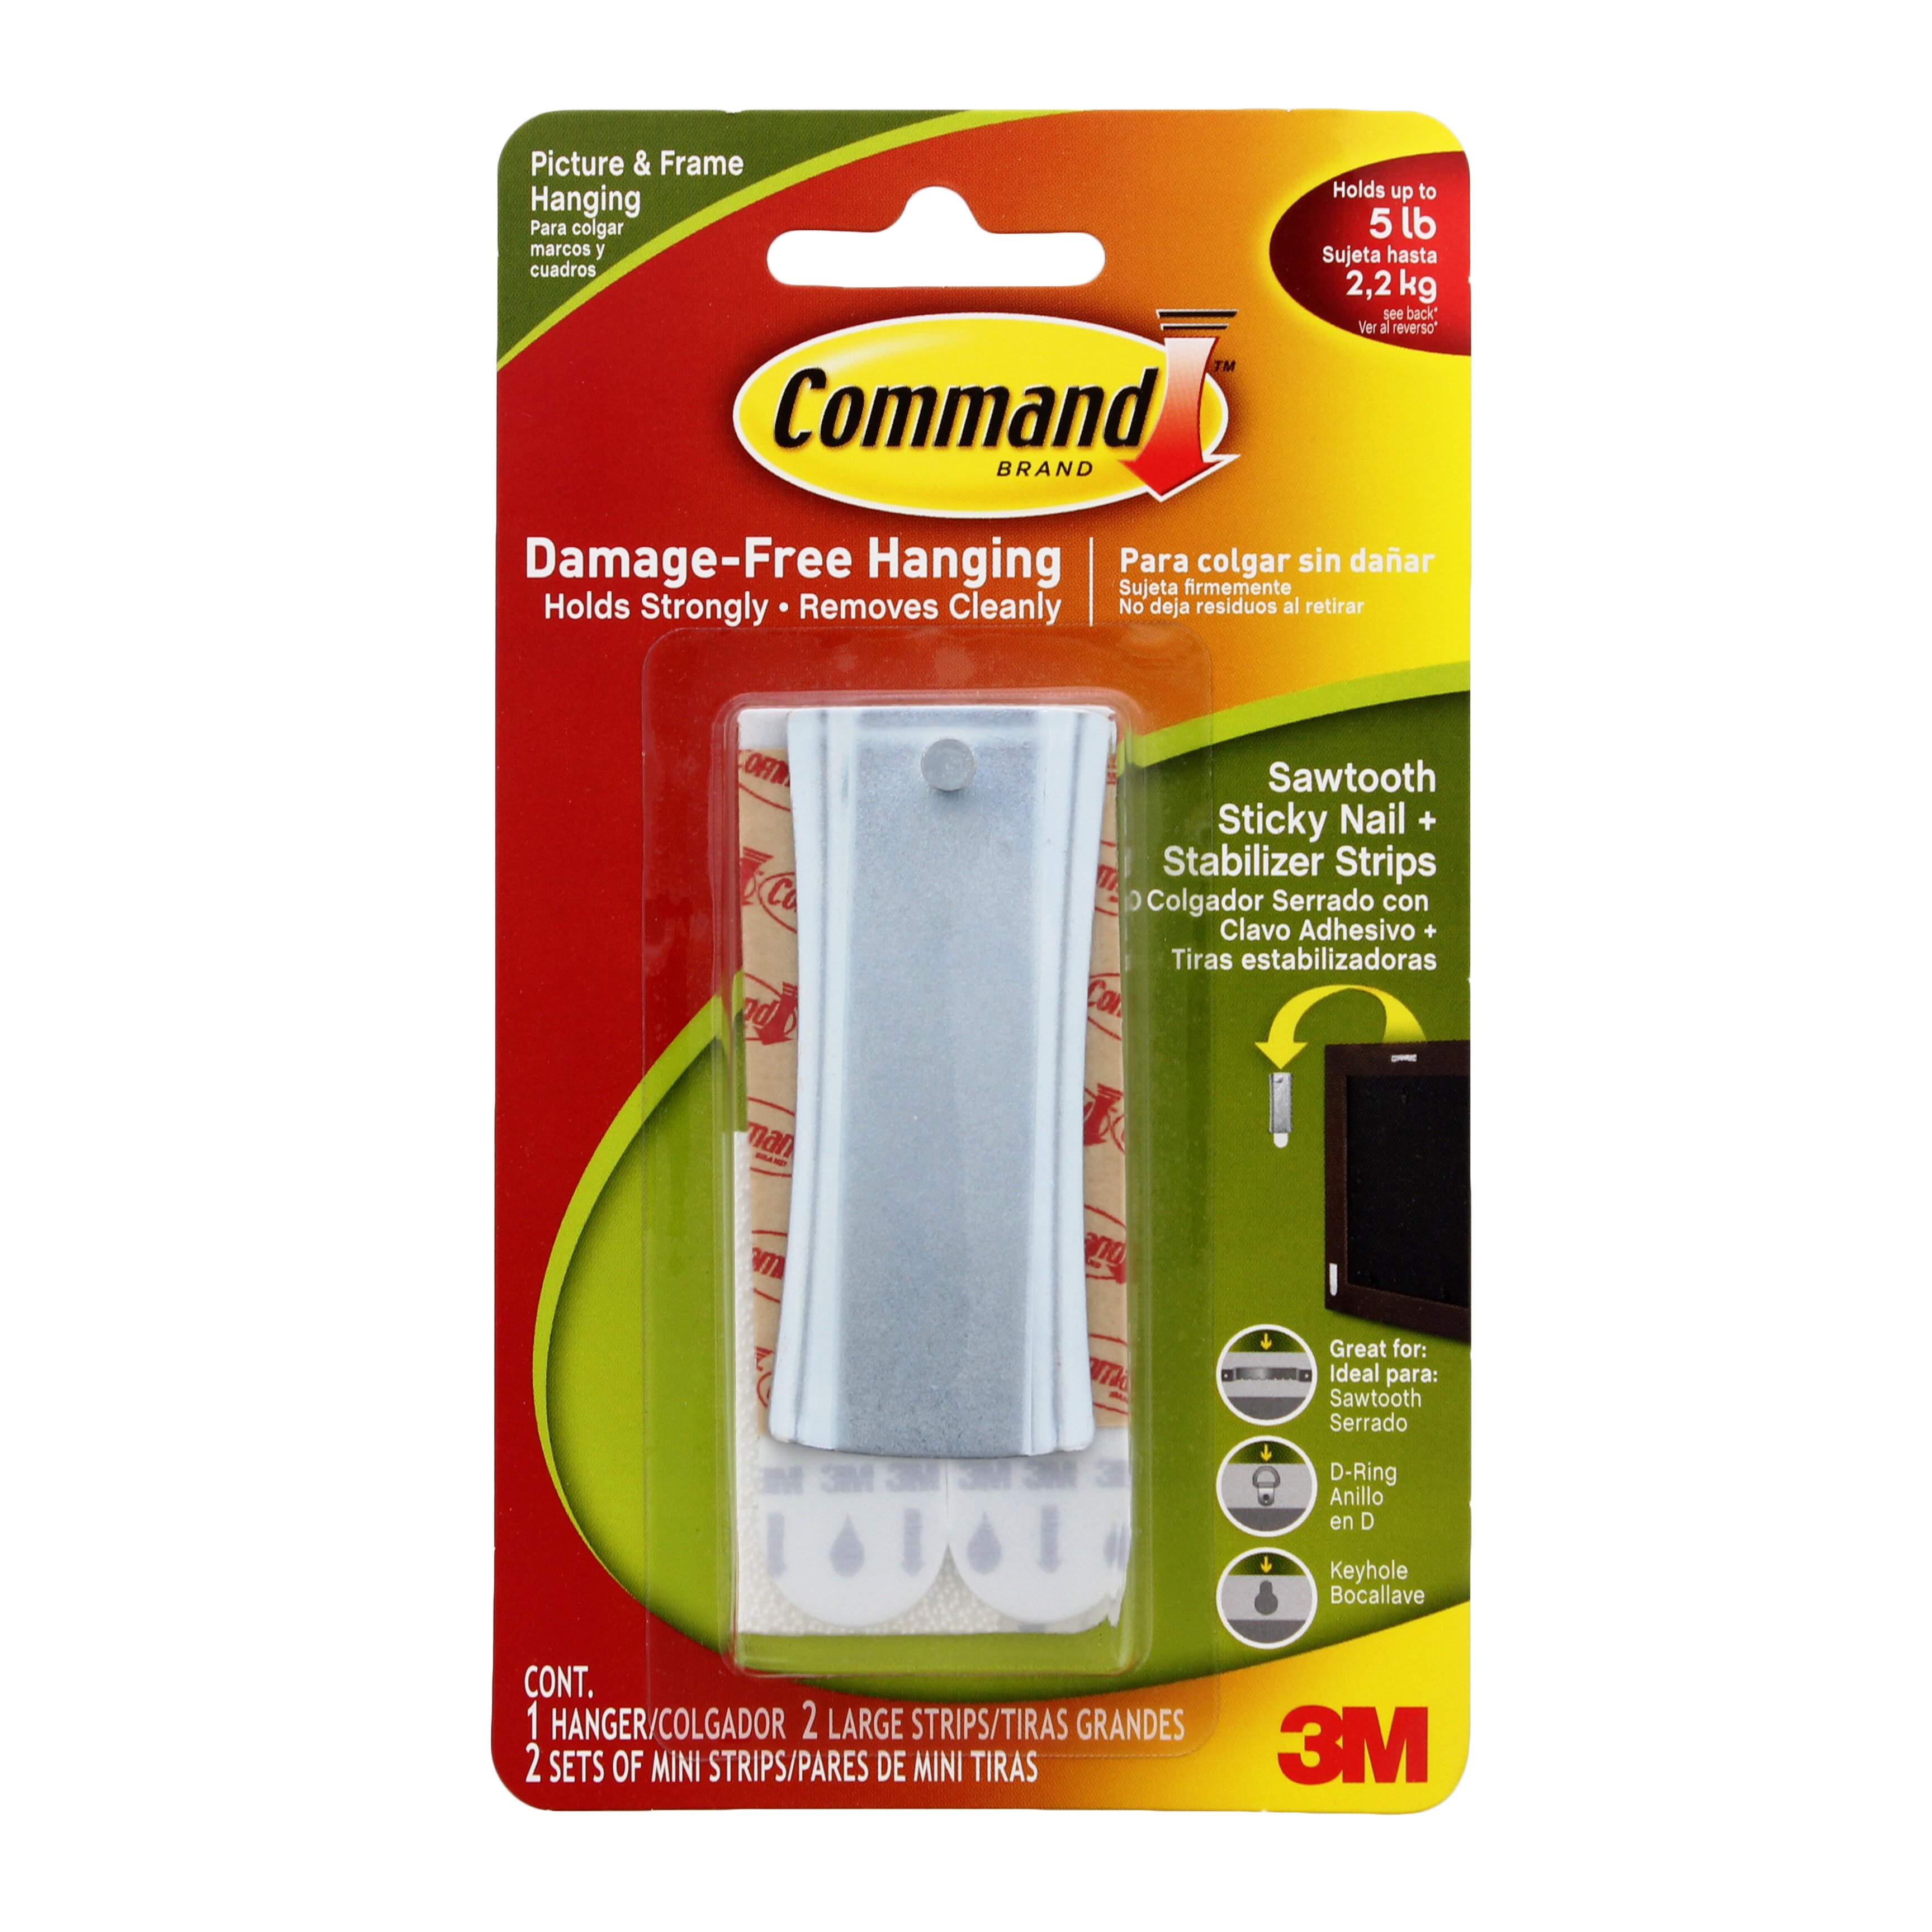 Command items